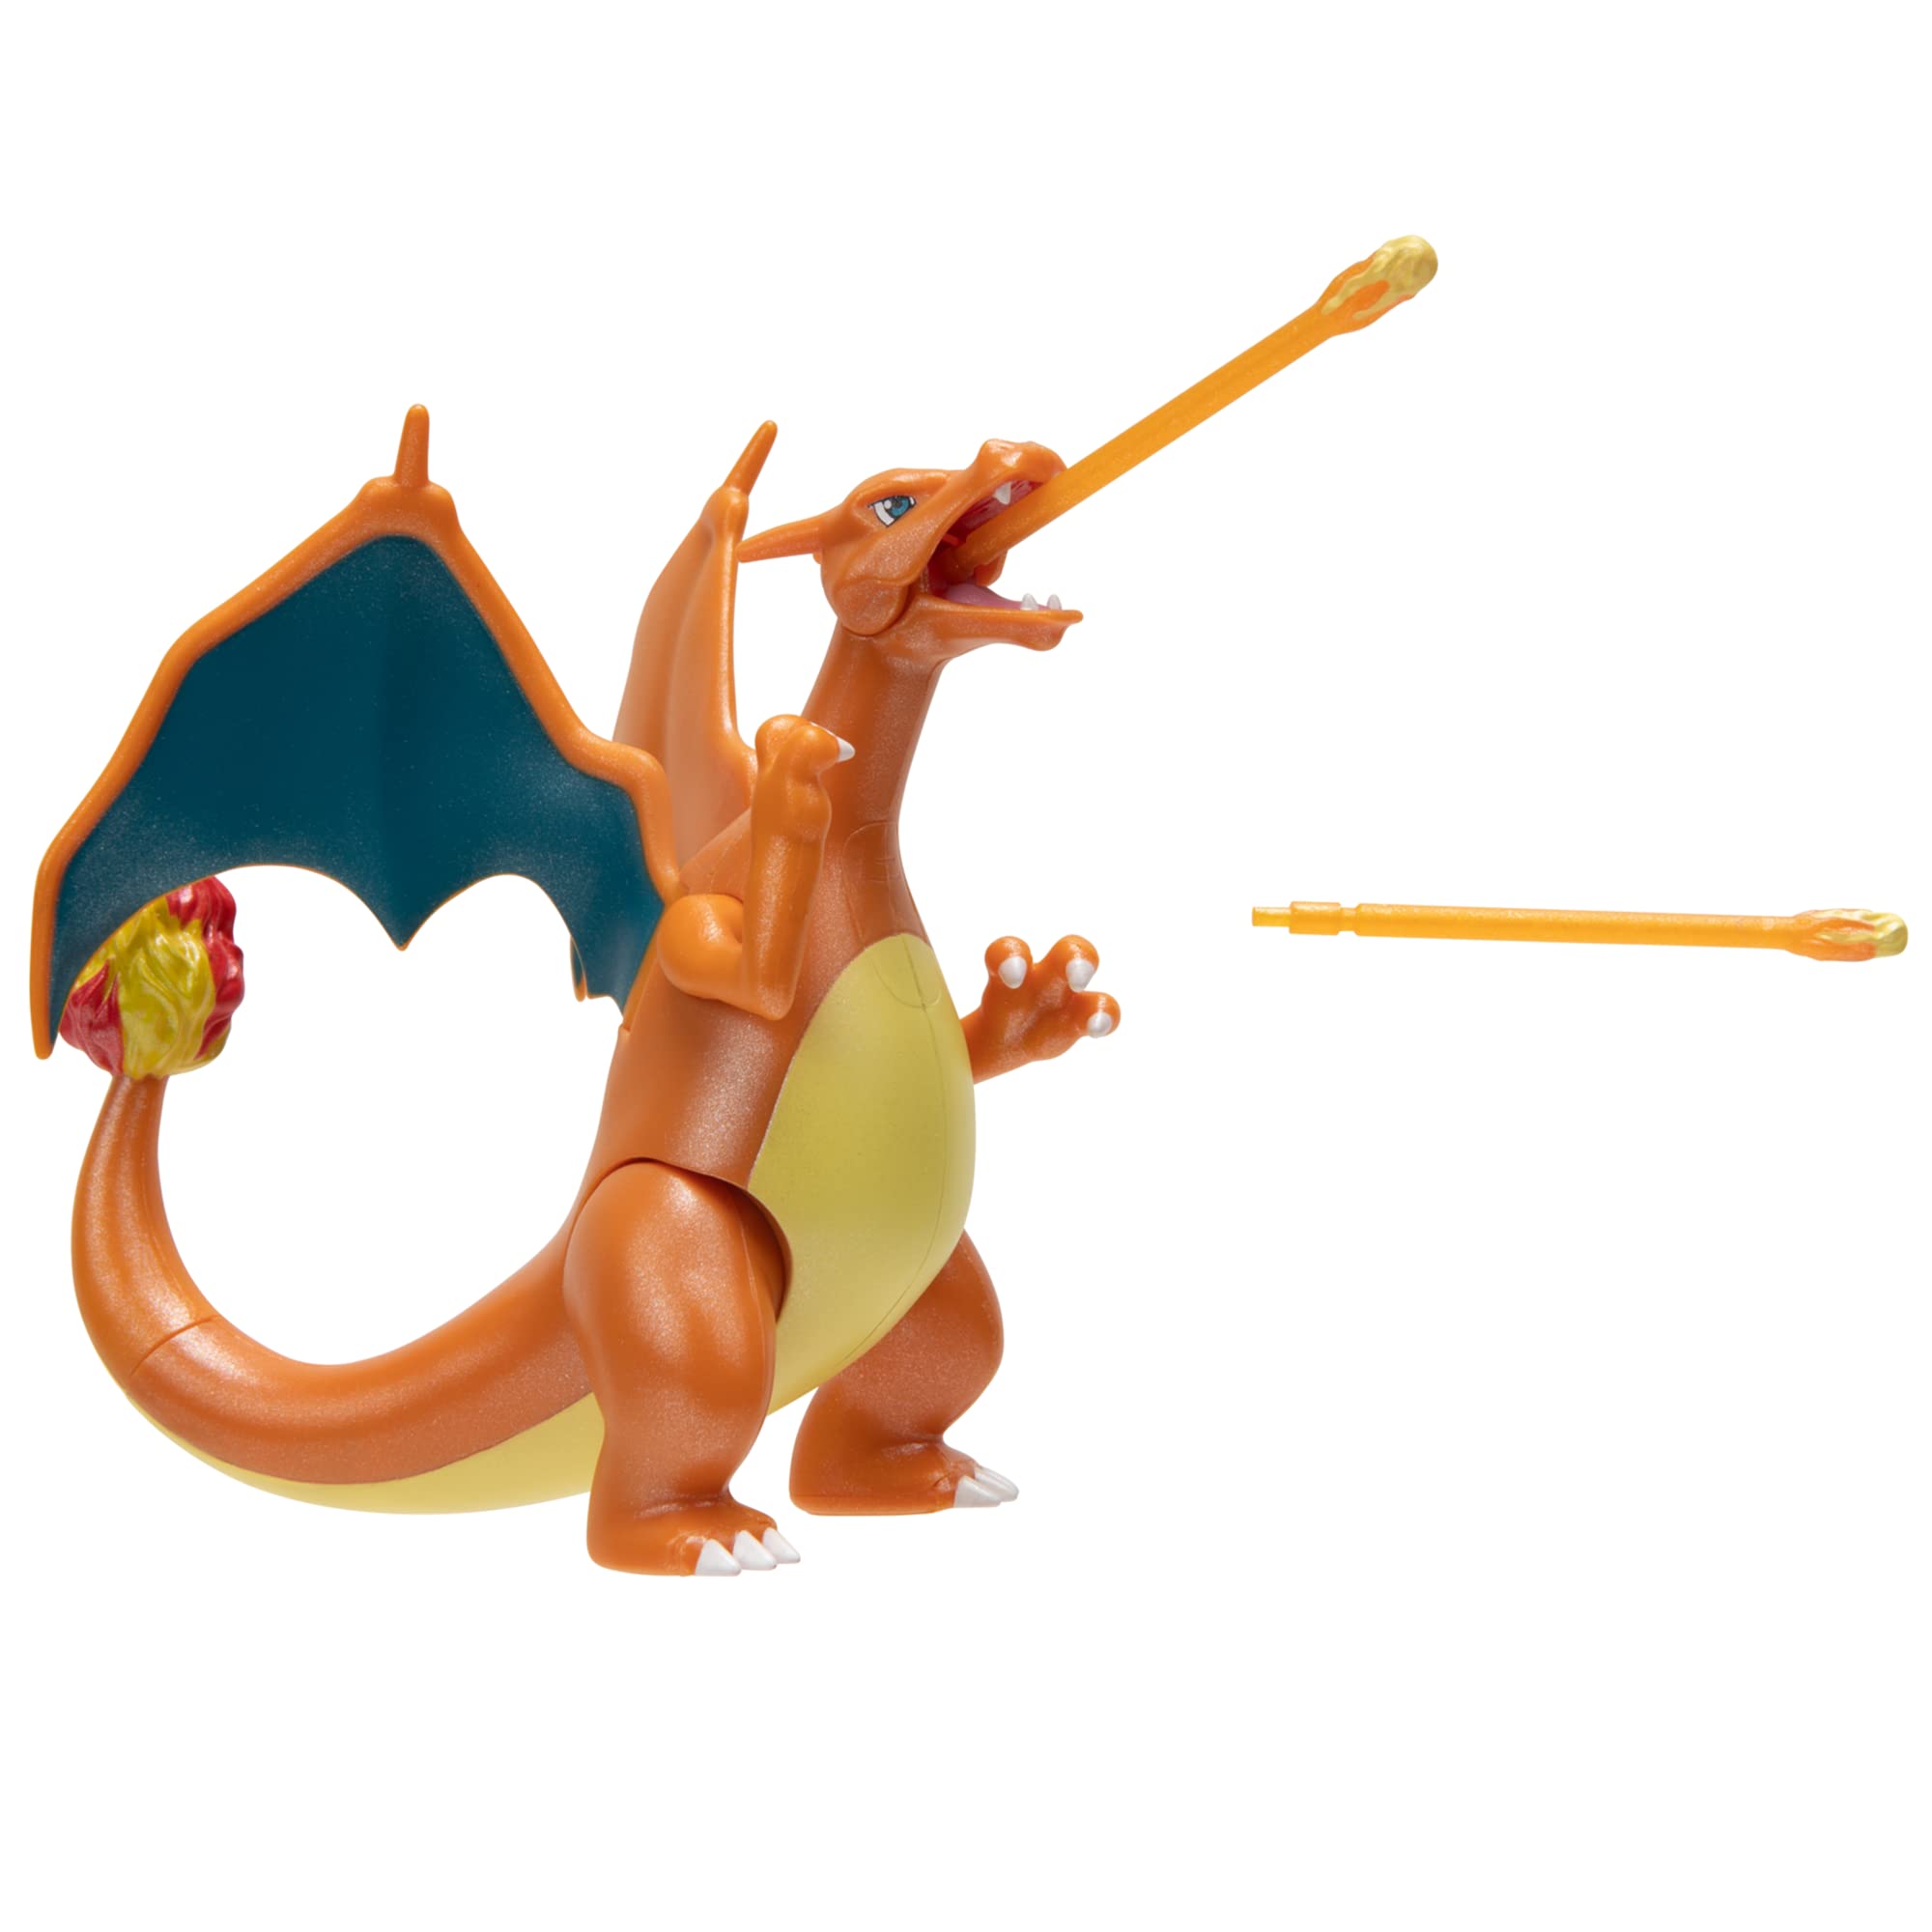 Pokemon Select Evolution 3 Pack - Features 2-Inch Charmander, 3-Inch Charmeleon and 4.5-Inch Charizard Battle Figures